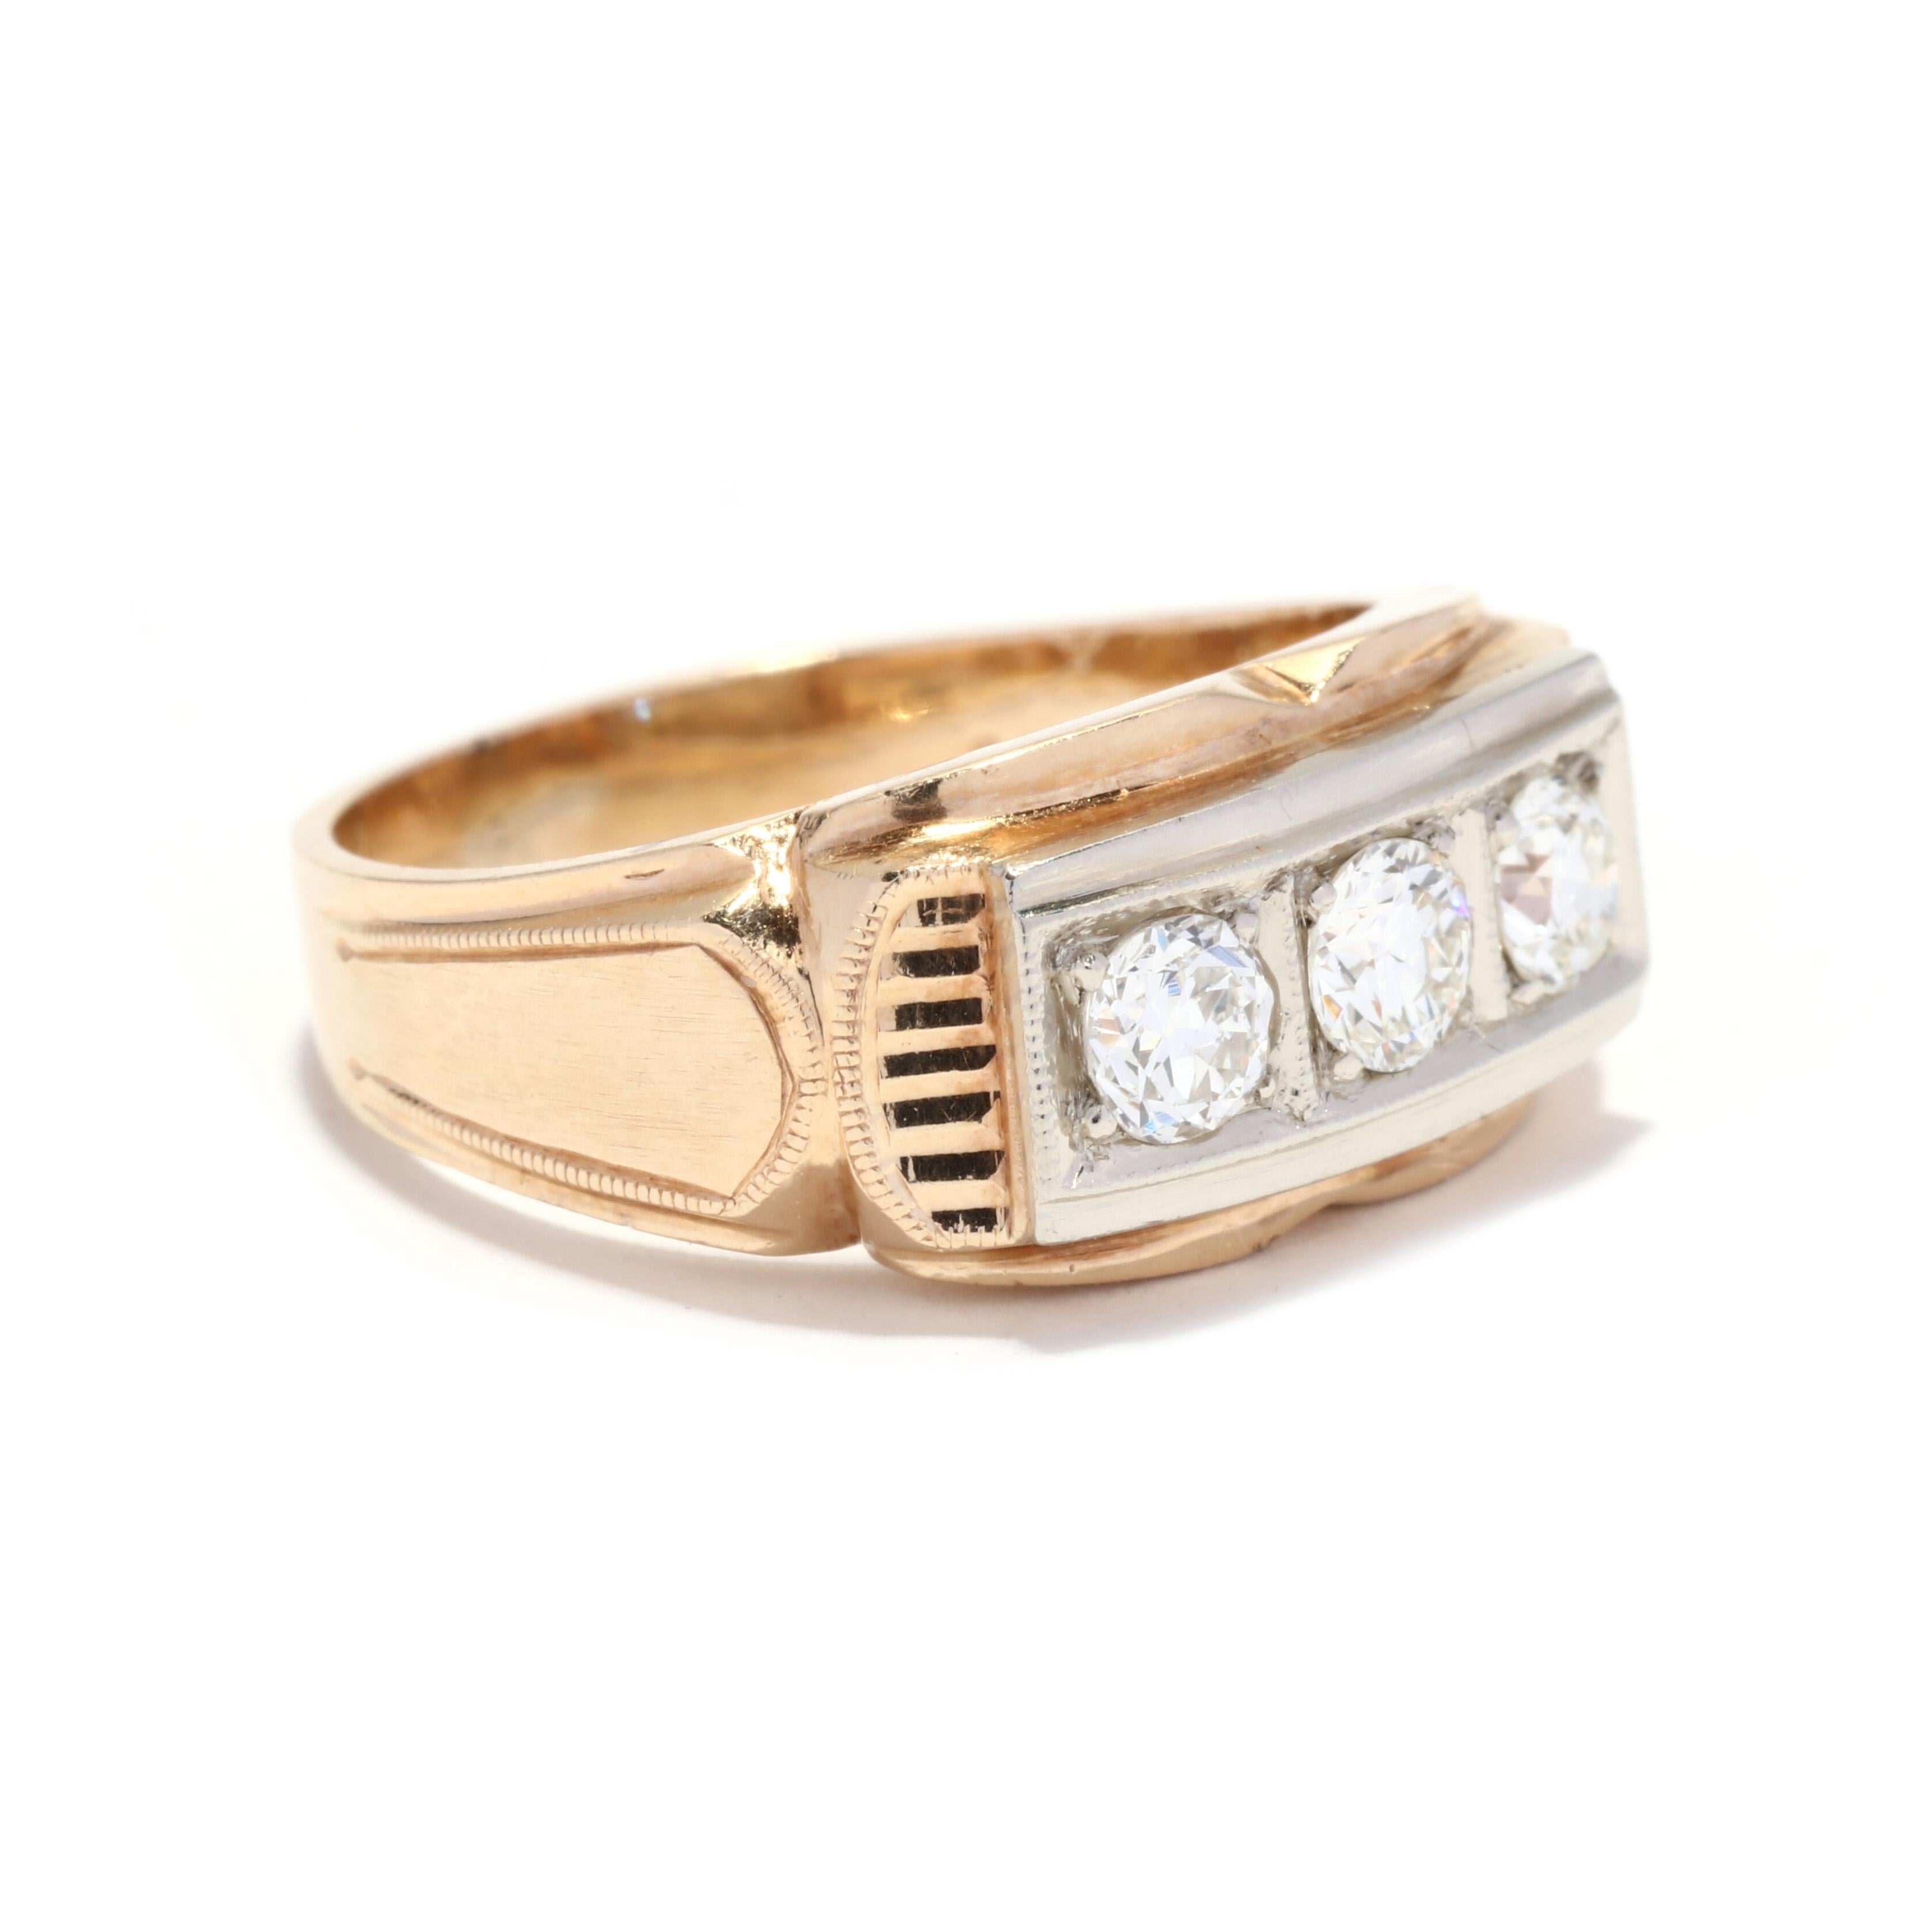 A retro 14 karat yellow and white gold diamond ring. This vintage ring features three old European cut diamonds weighing approximately .65 total carats set in a white gold horizontal design on a yellow gold mounting with geometric engraved